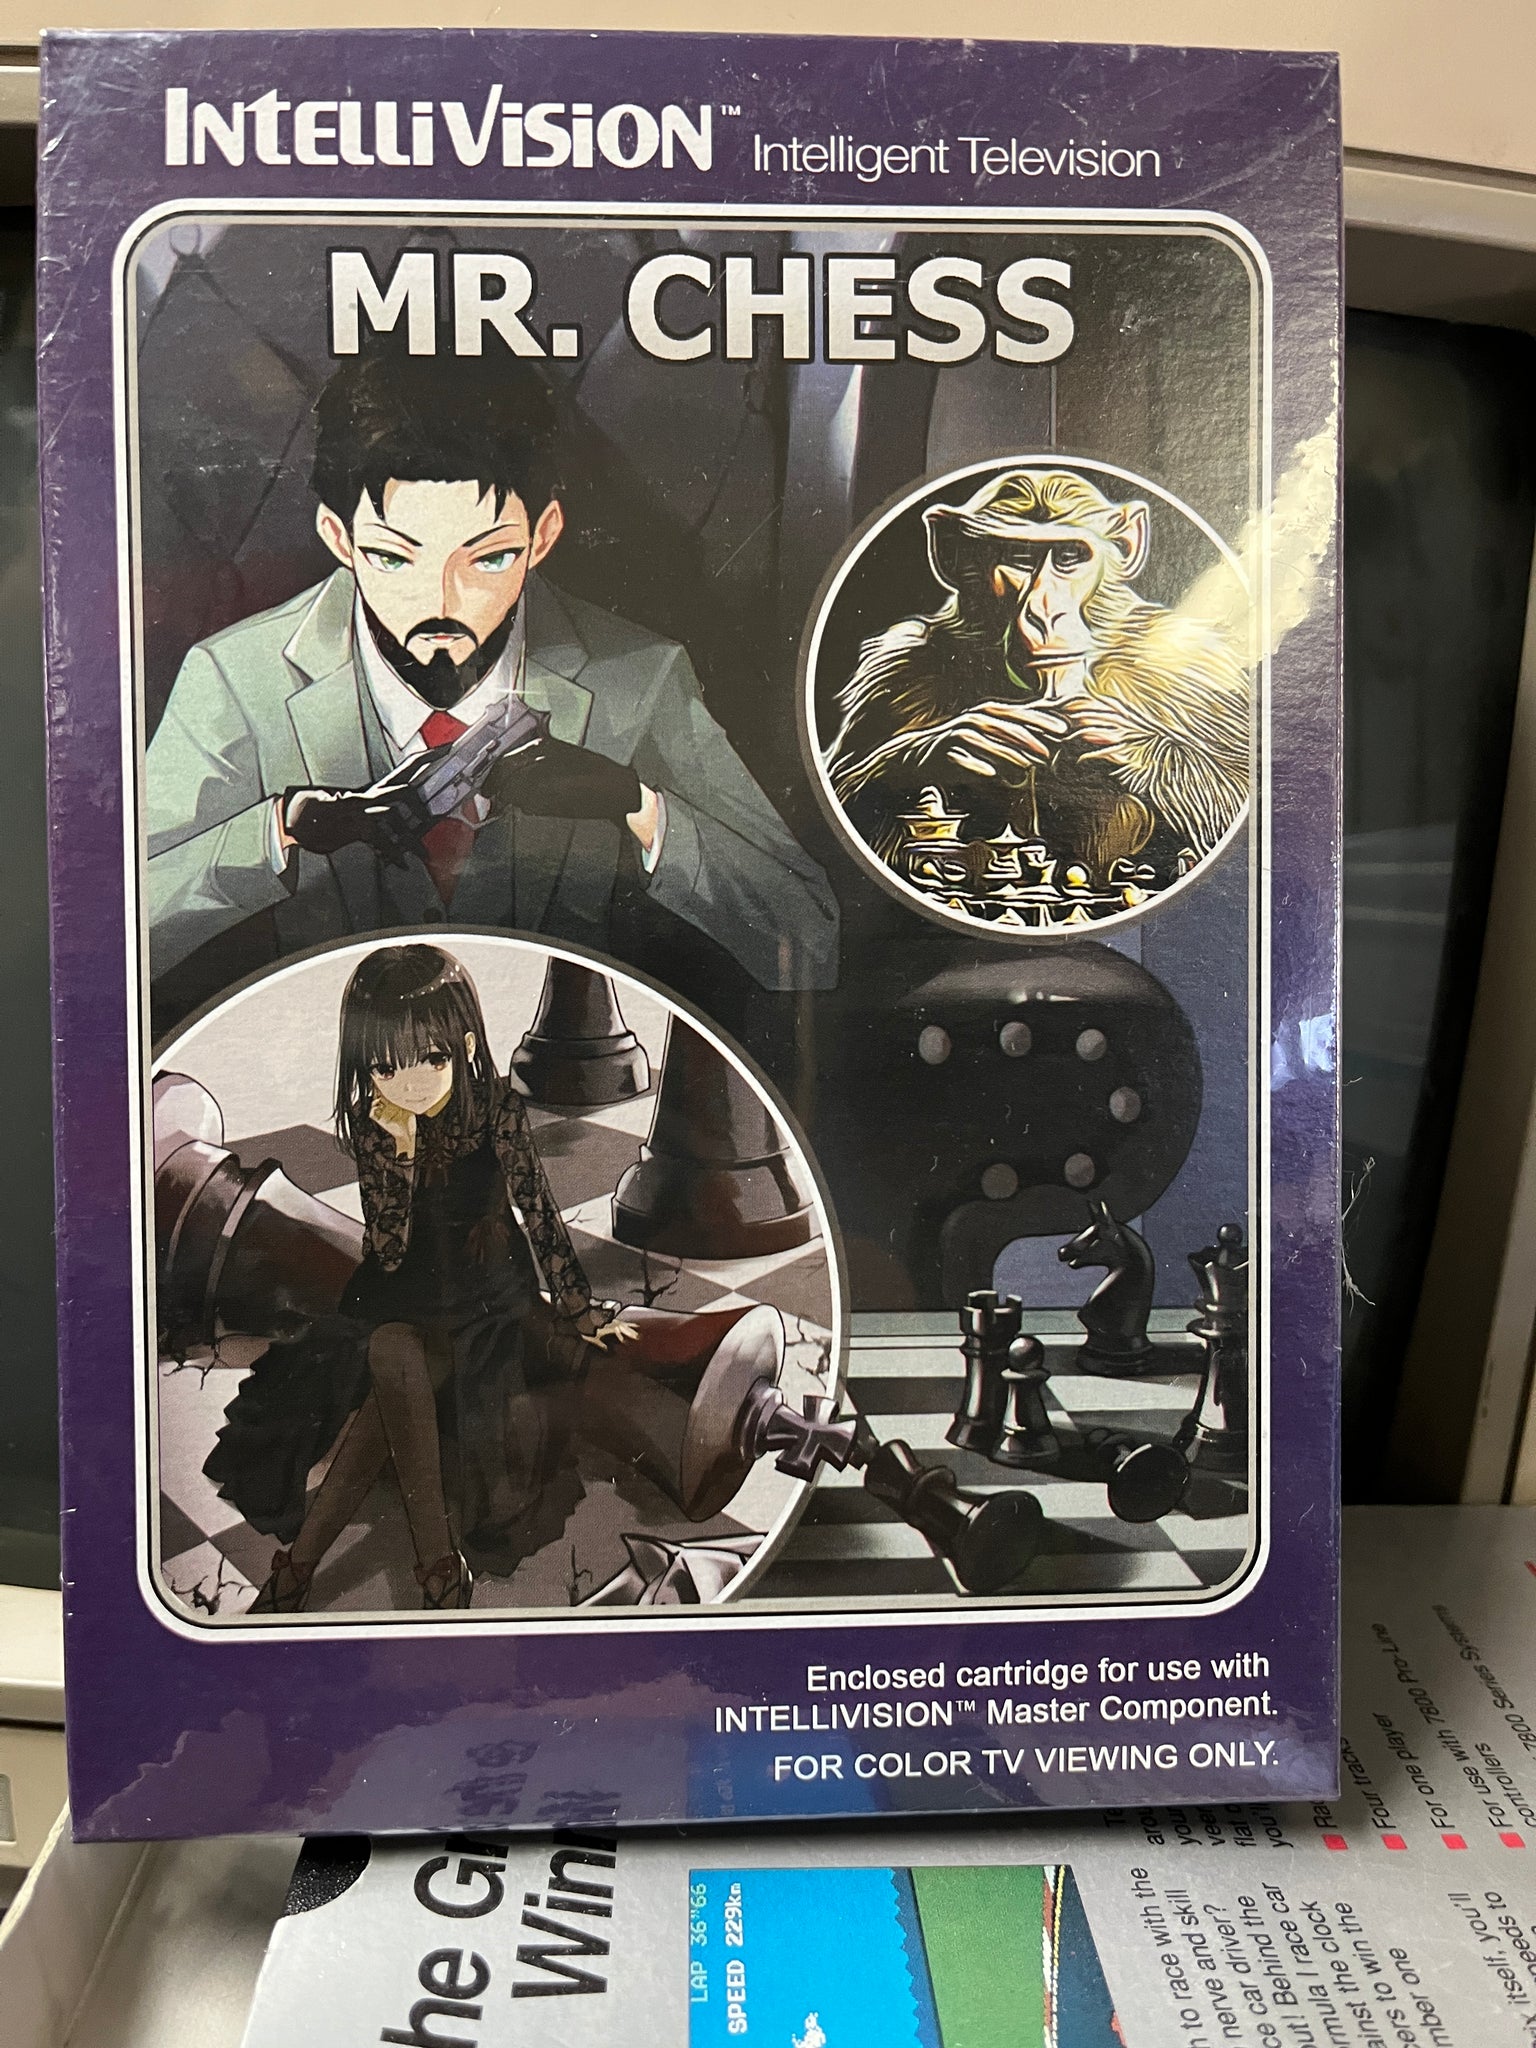 Mr. Chess for Intellvision by Elektronite